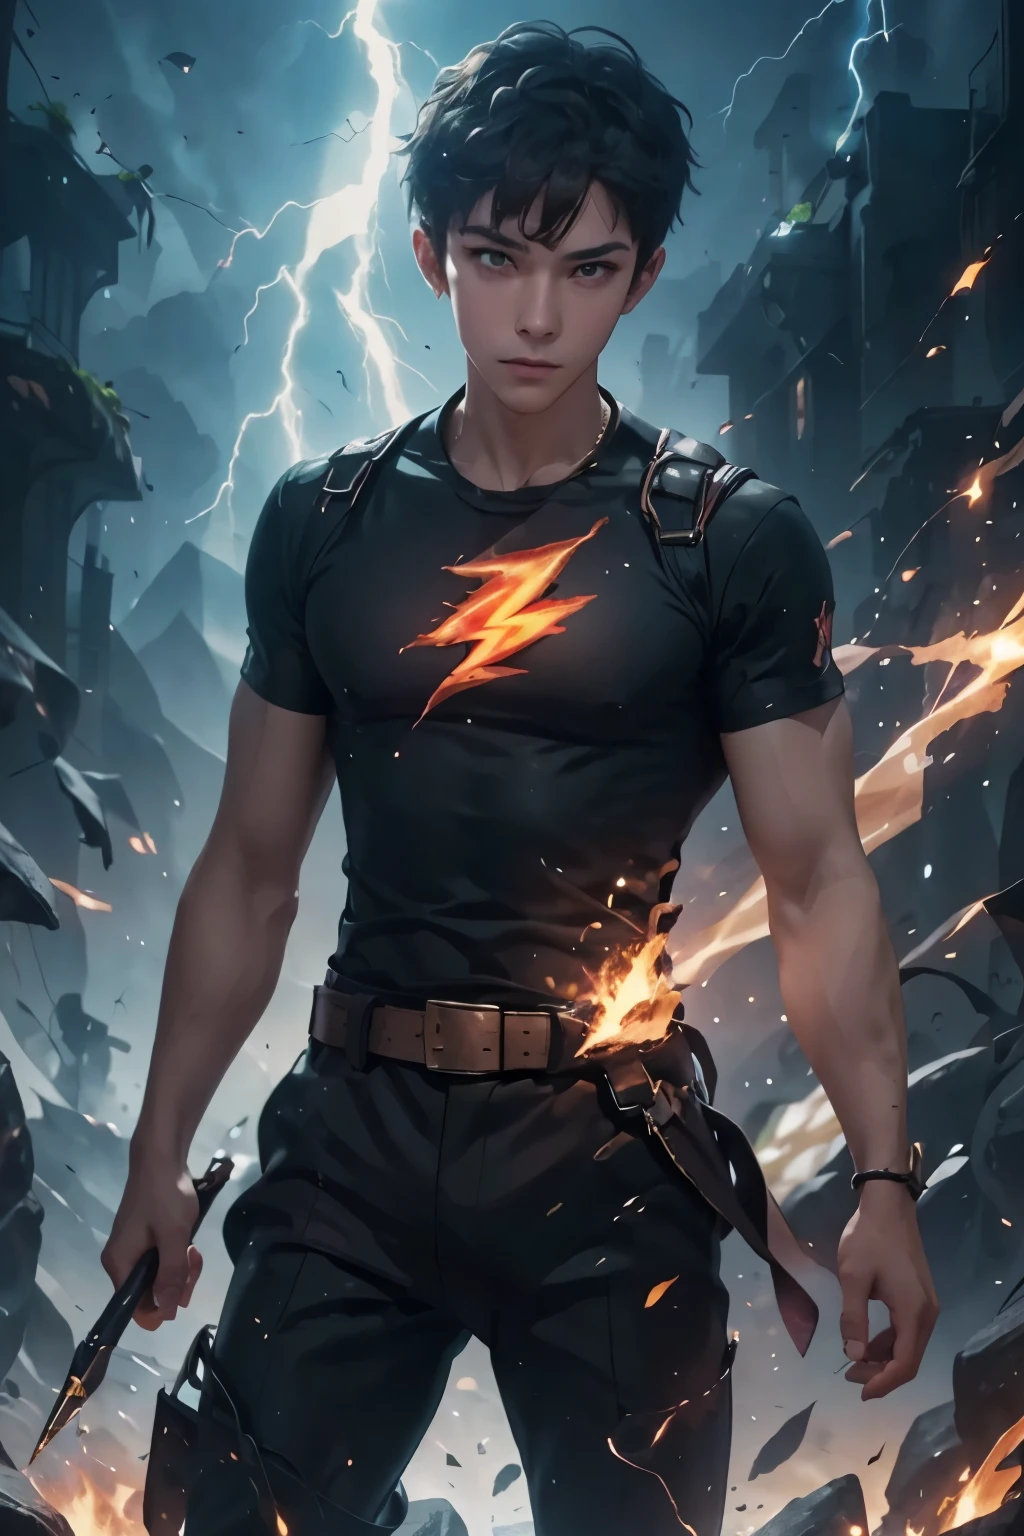 Photo of a boy - boyish, sloppy appearance: mulatto woman with short black tousled hair,  magic wand shoots lightning ! on the other side there is a fireball, black T-shirt, flame, elegant, digital painting, a piece of fantasy art of the highest quality. 